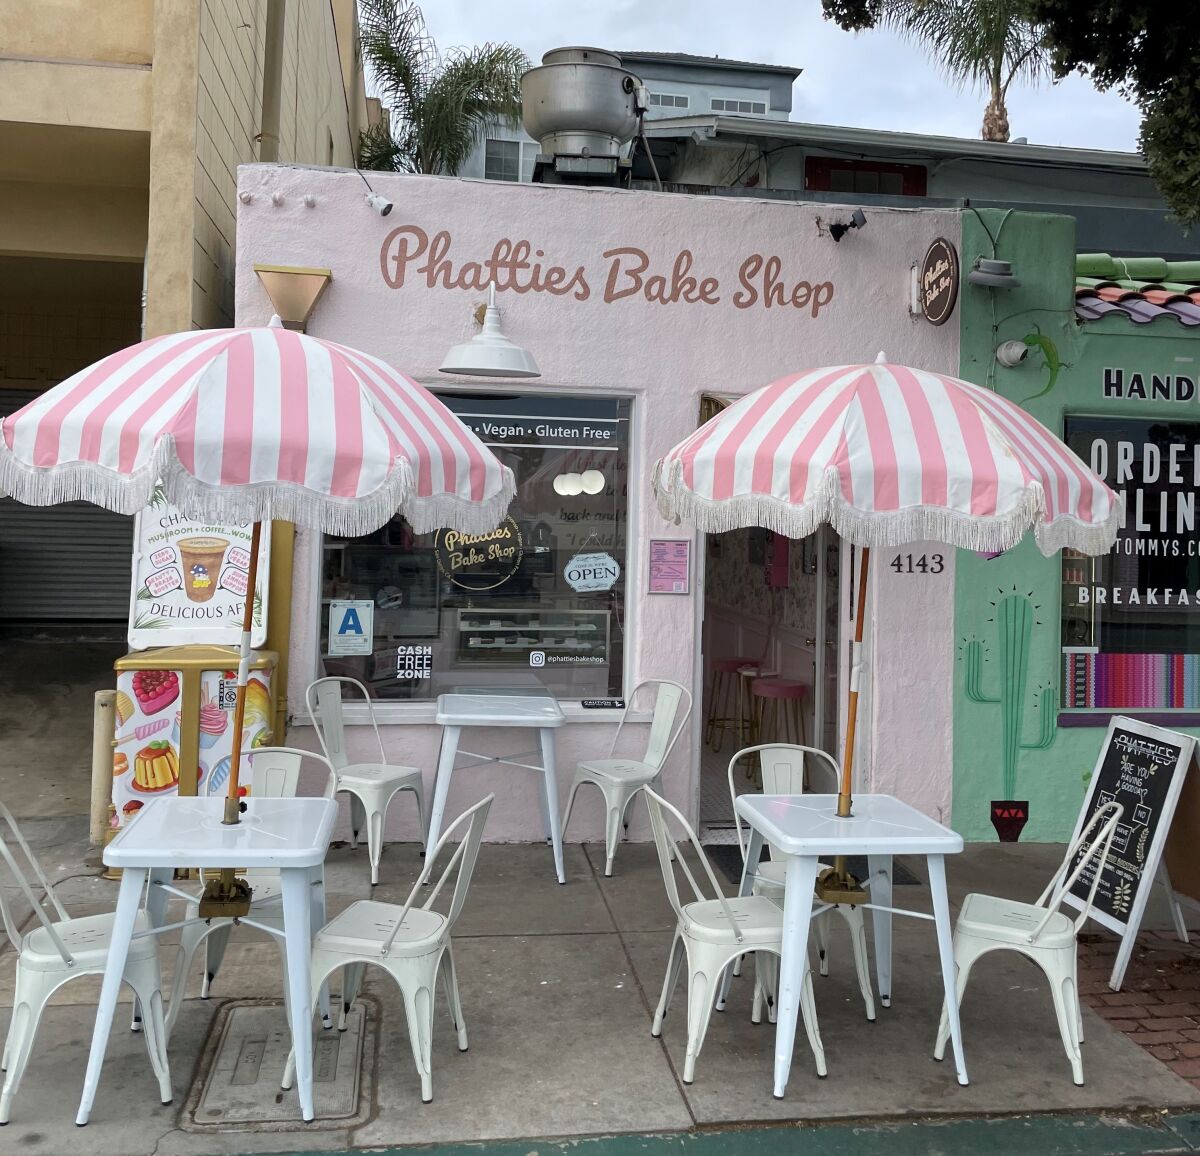 Phatties Bake Shop is at 4143 Voltaire St. in Point Loma.